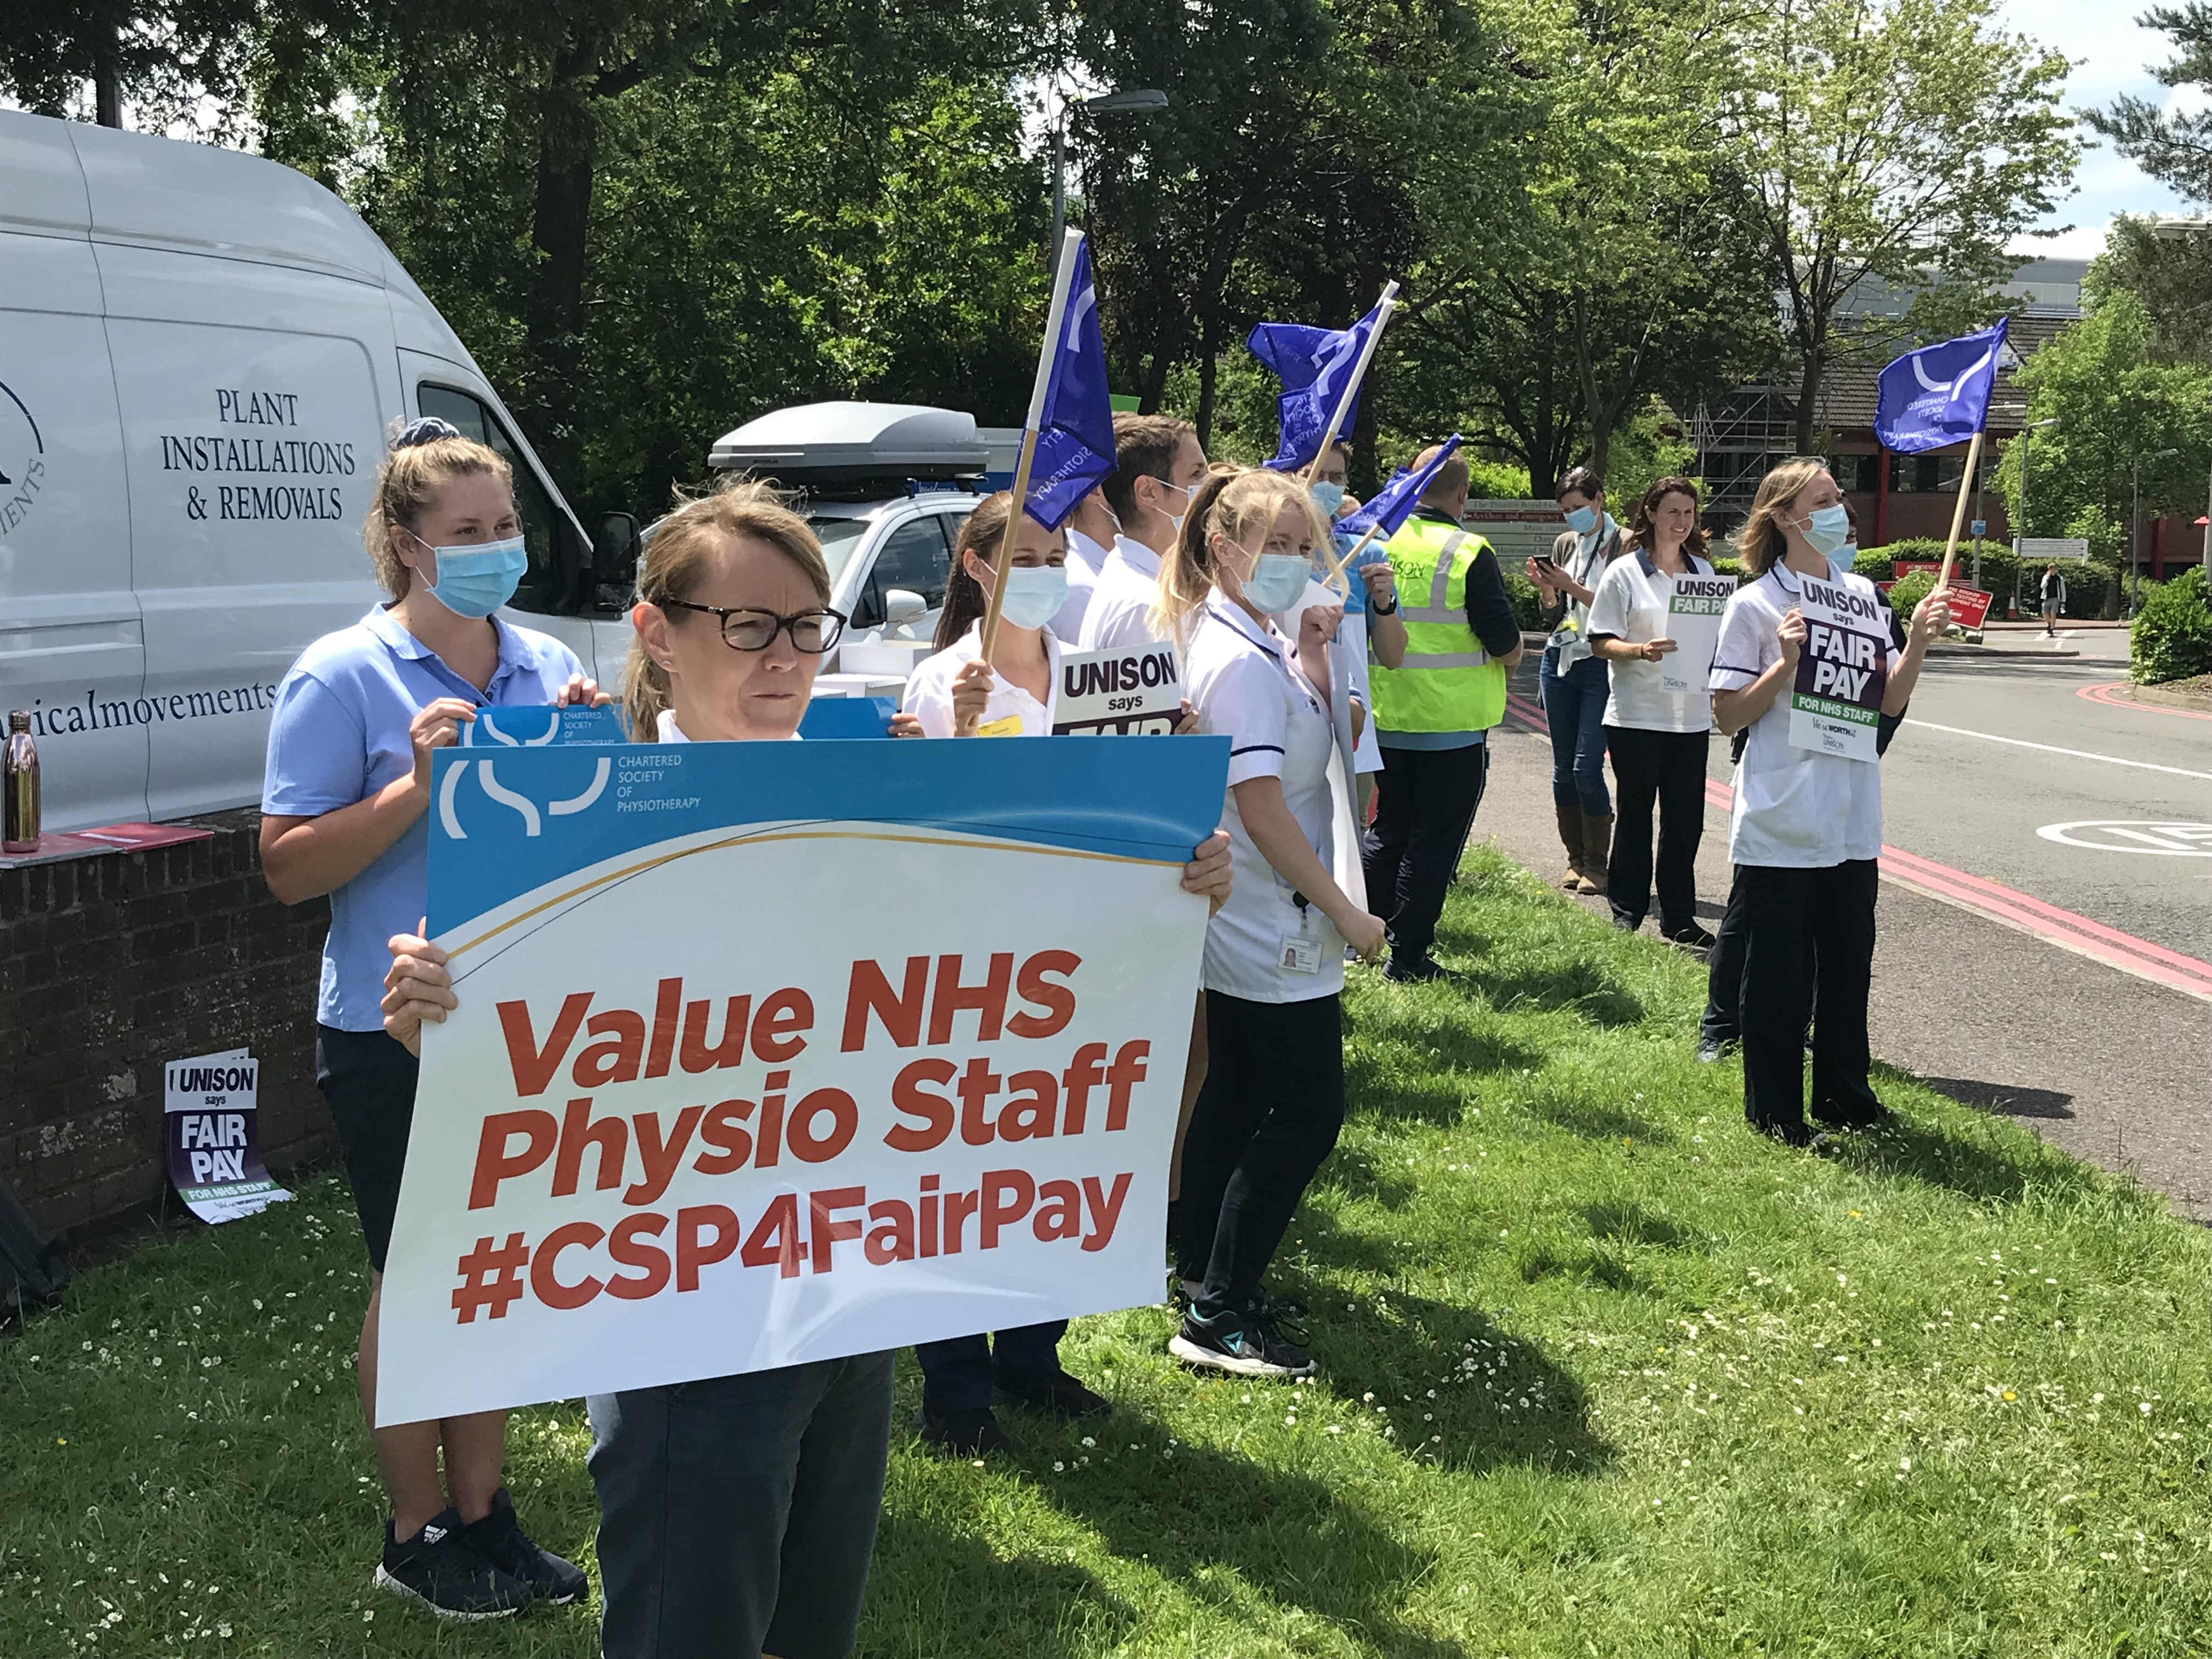 Demos across the country call for fair pay for NHS physios